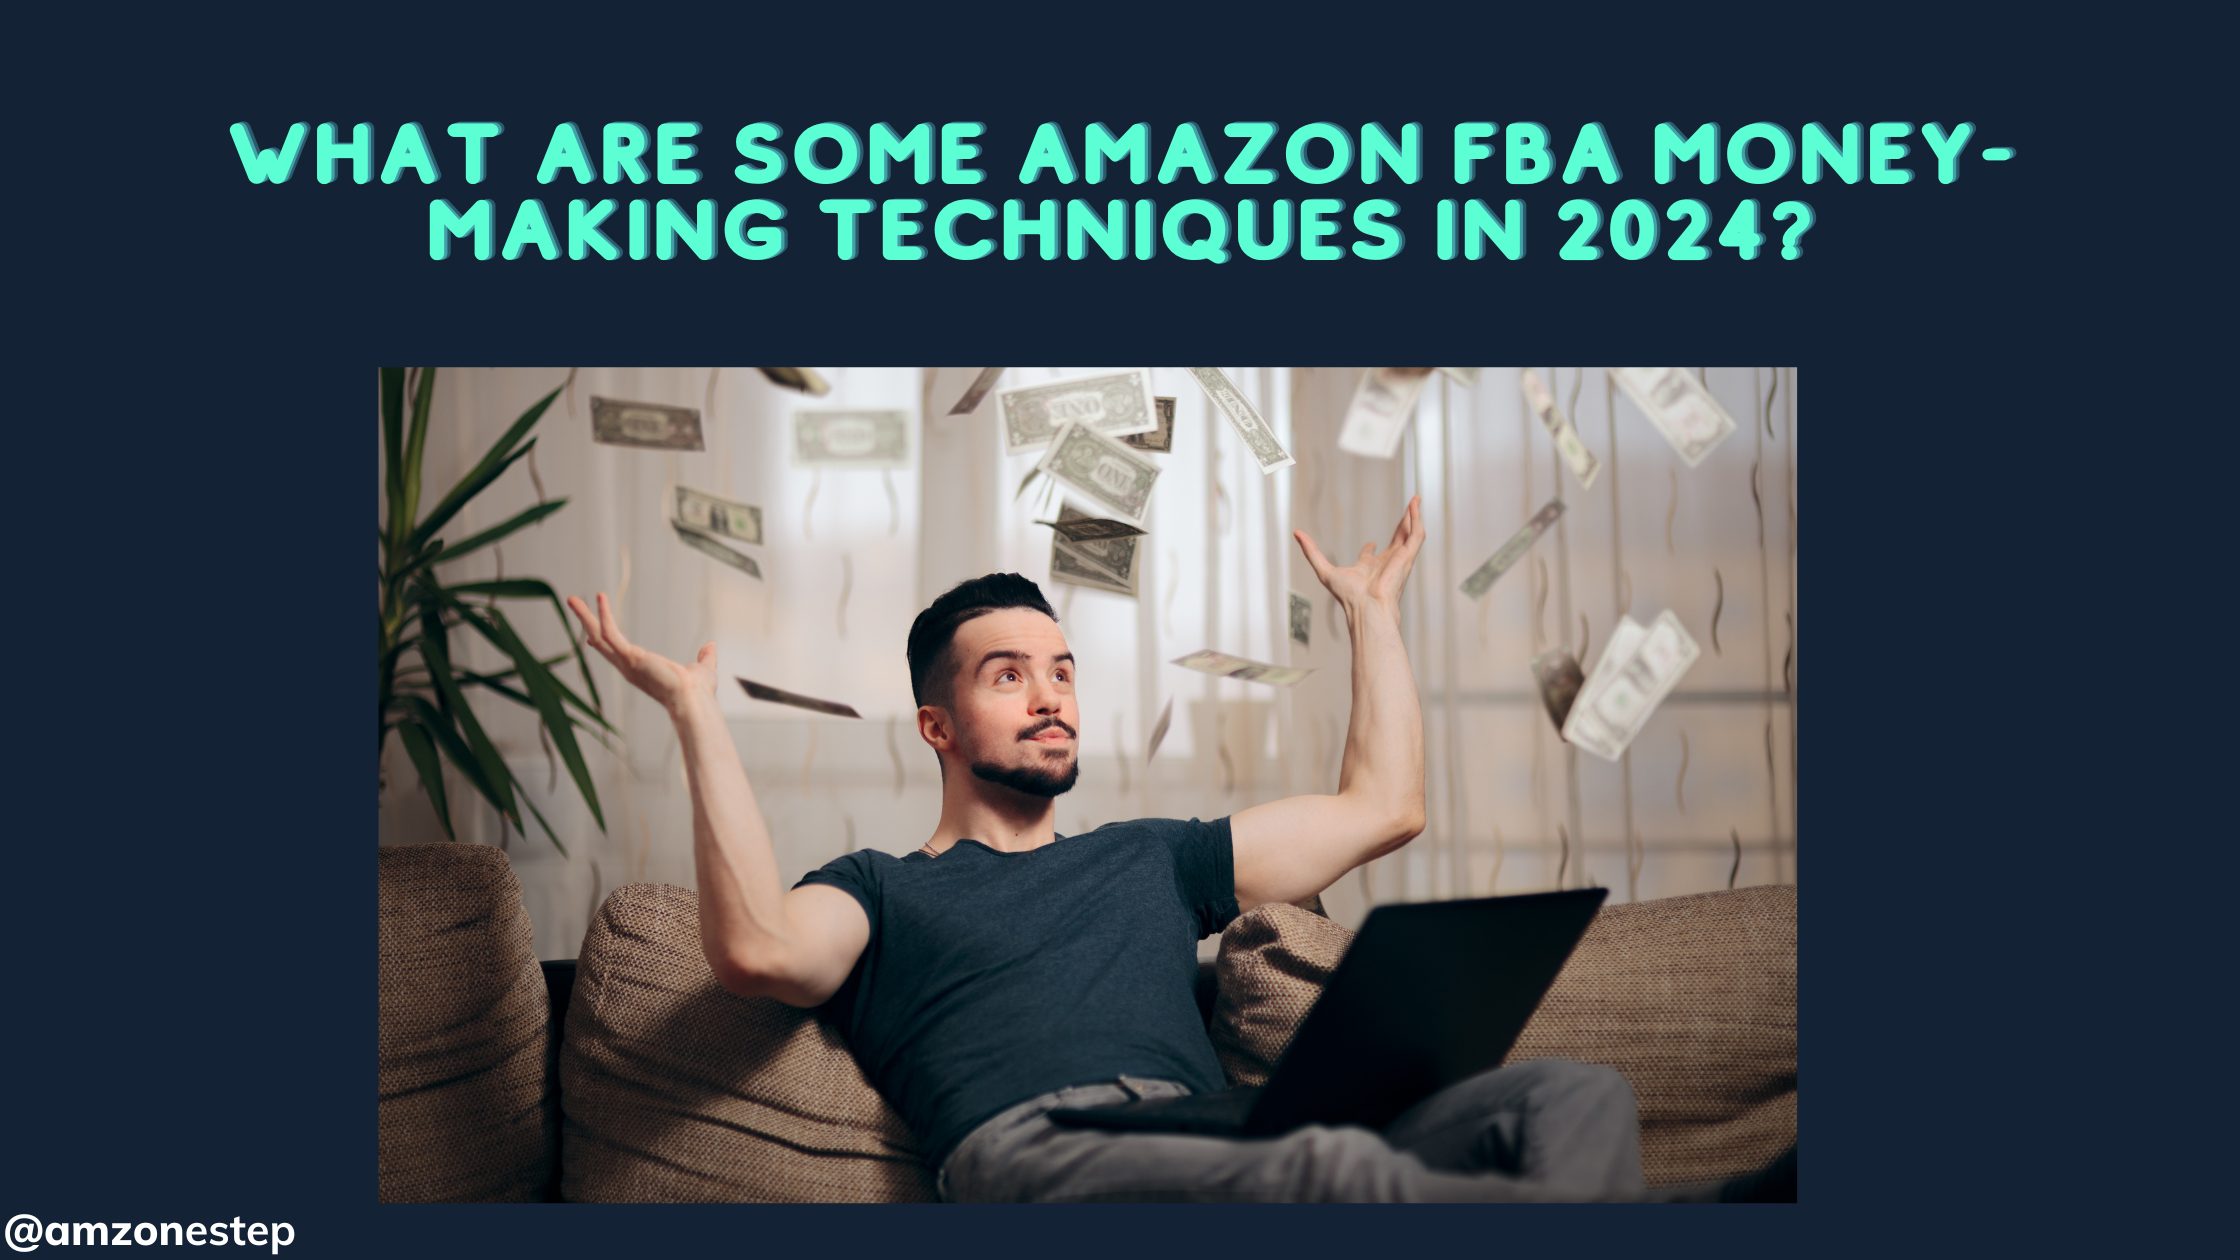 What Are Some Amazon FBA Money-Making Techniques In 2024?